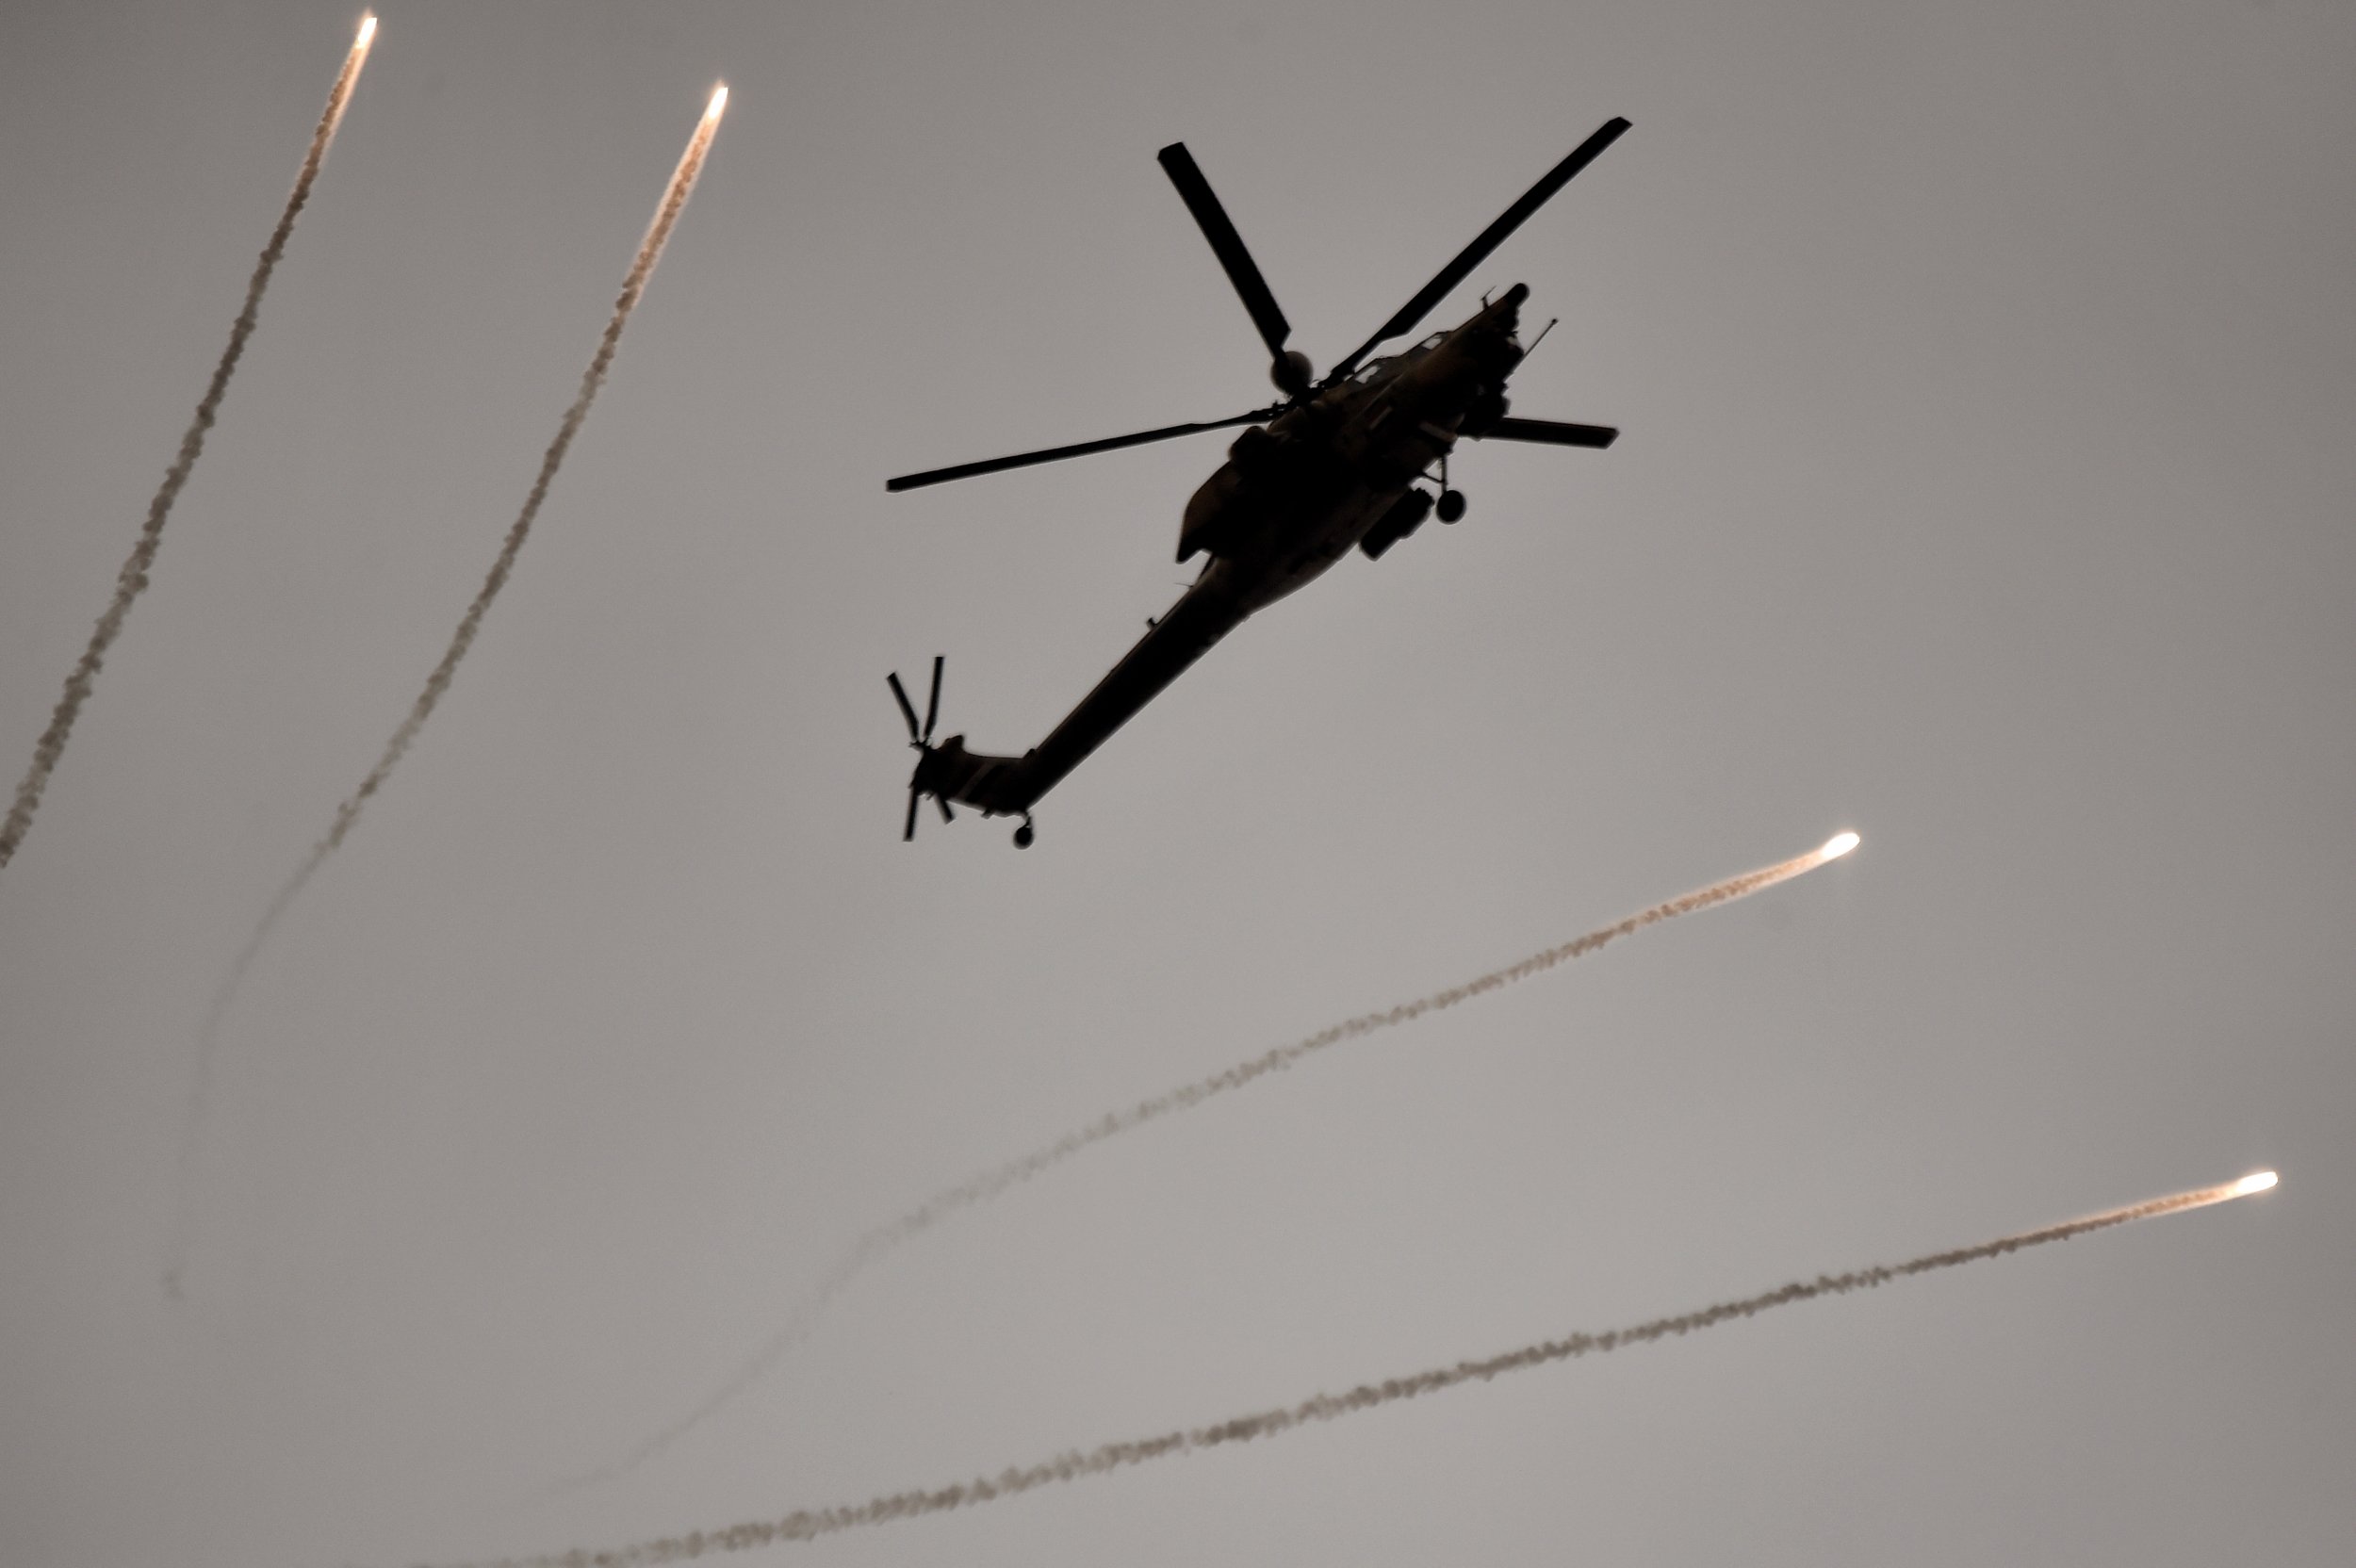 Iraqi helicopter over Mosul